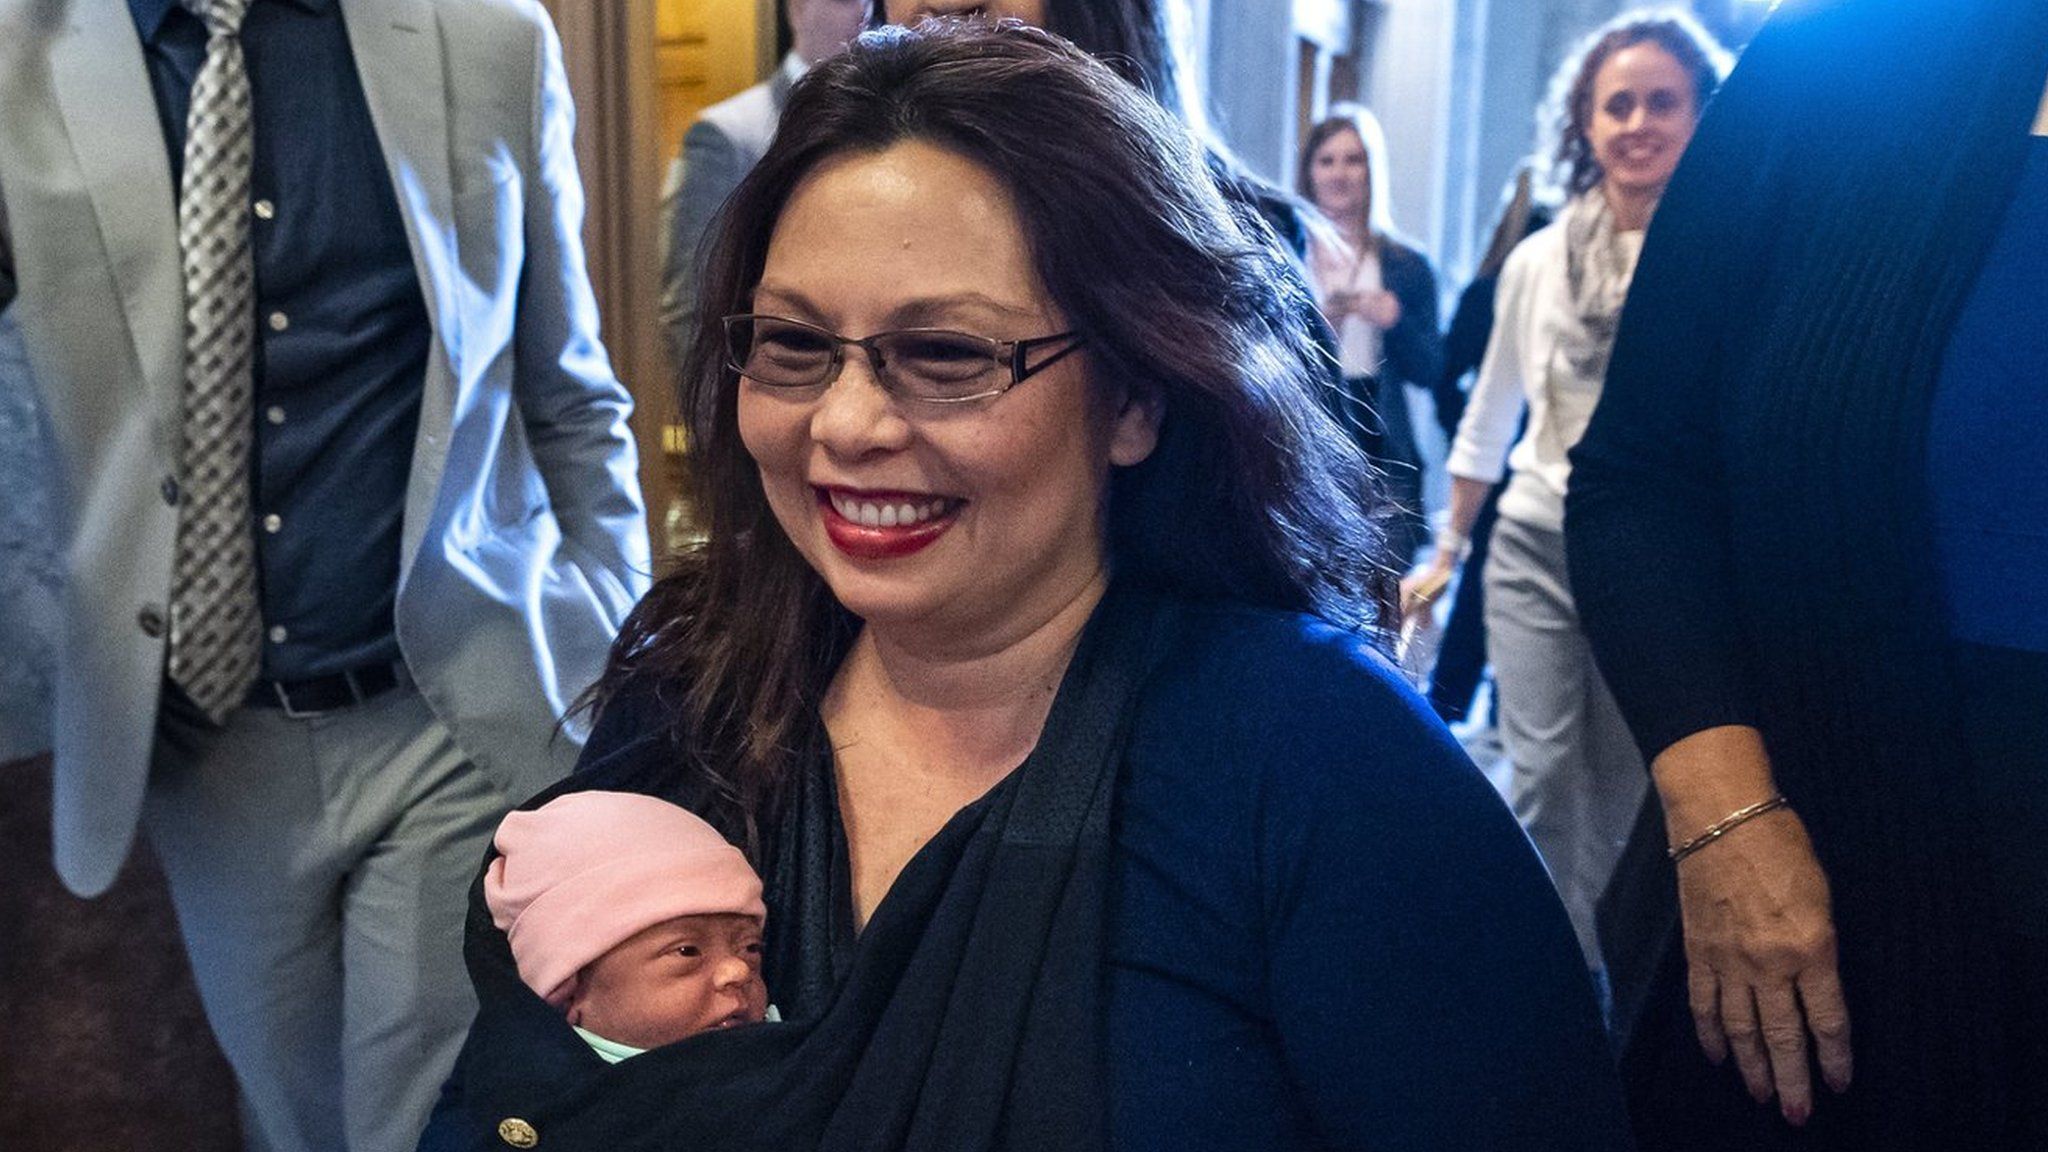 Democratic Senator from Illinois Tammy Duckworth carries her 10-day old daughter Maile Pearl Bowlsbey onto the Senate floor